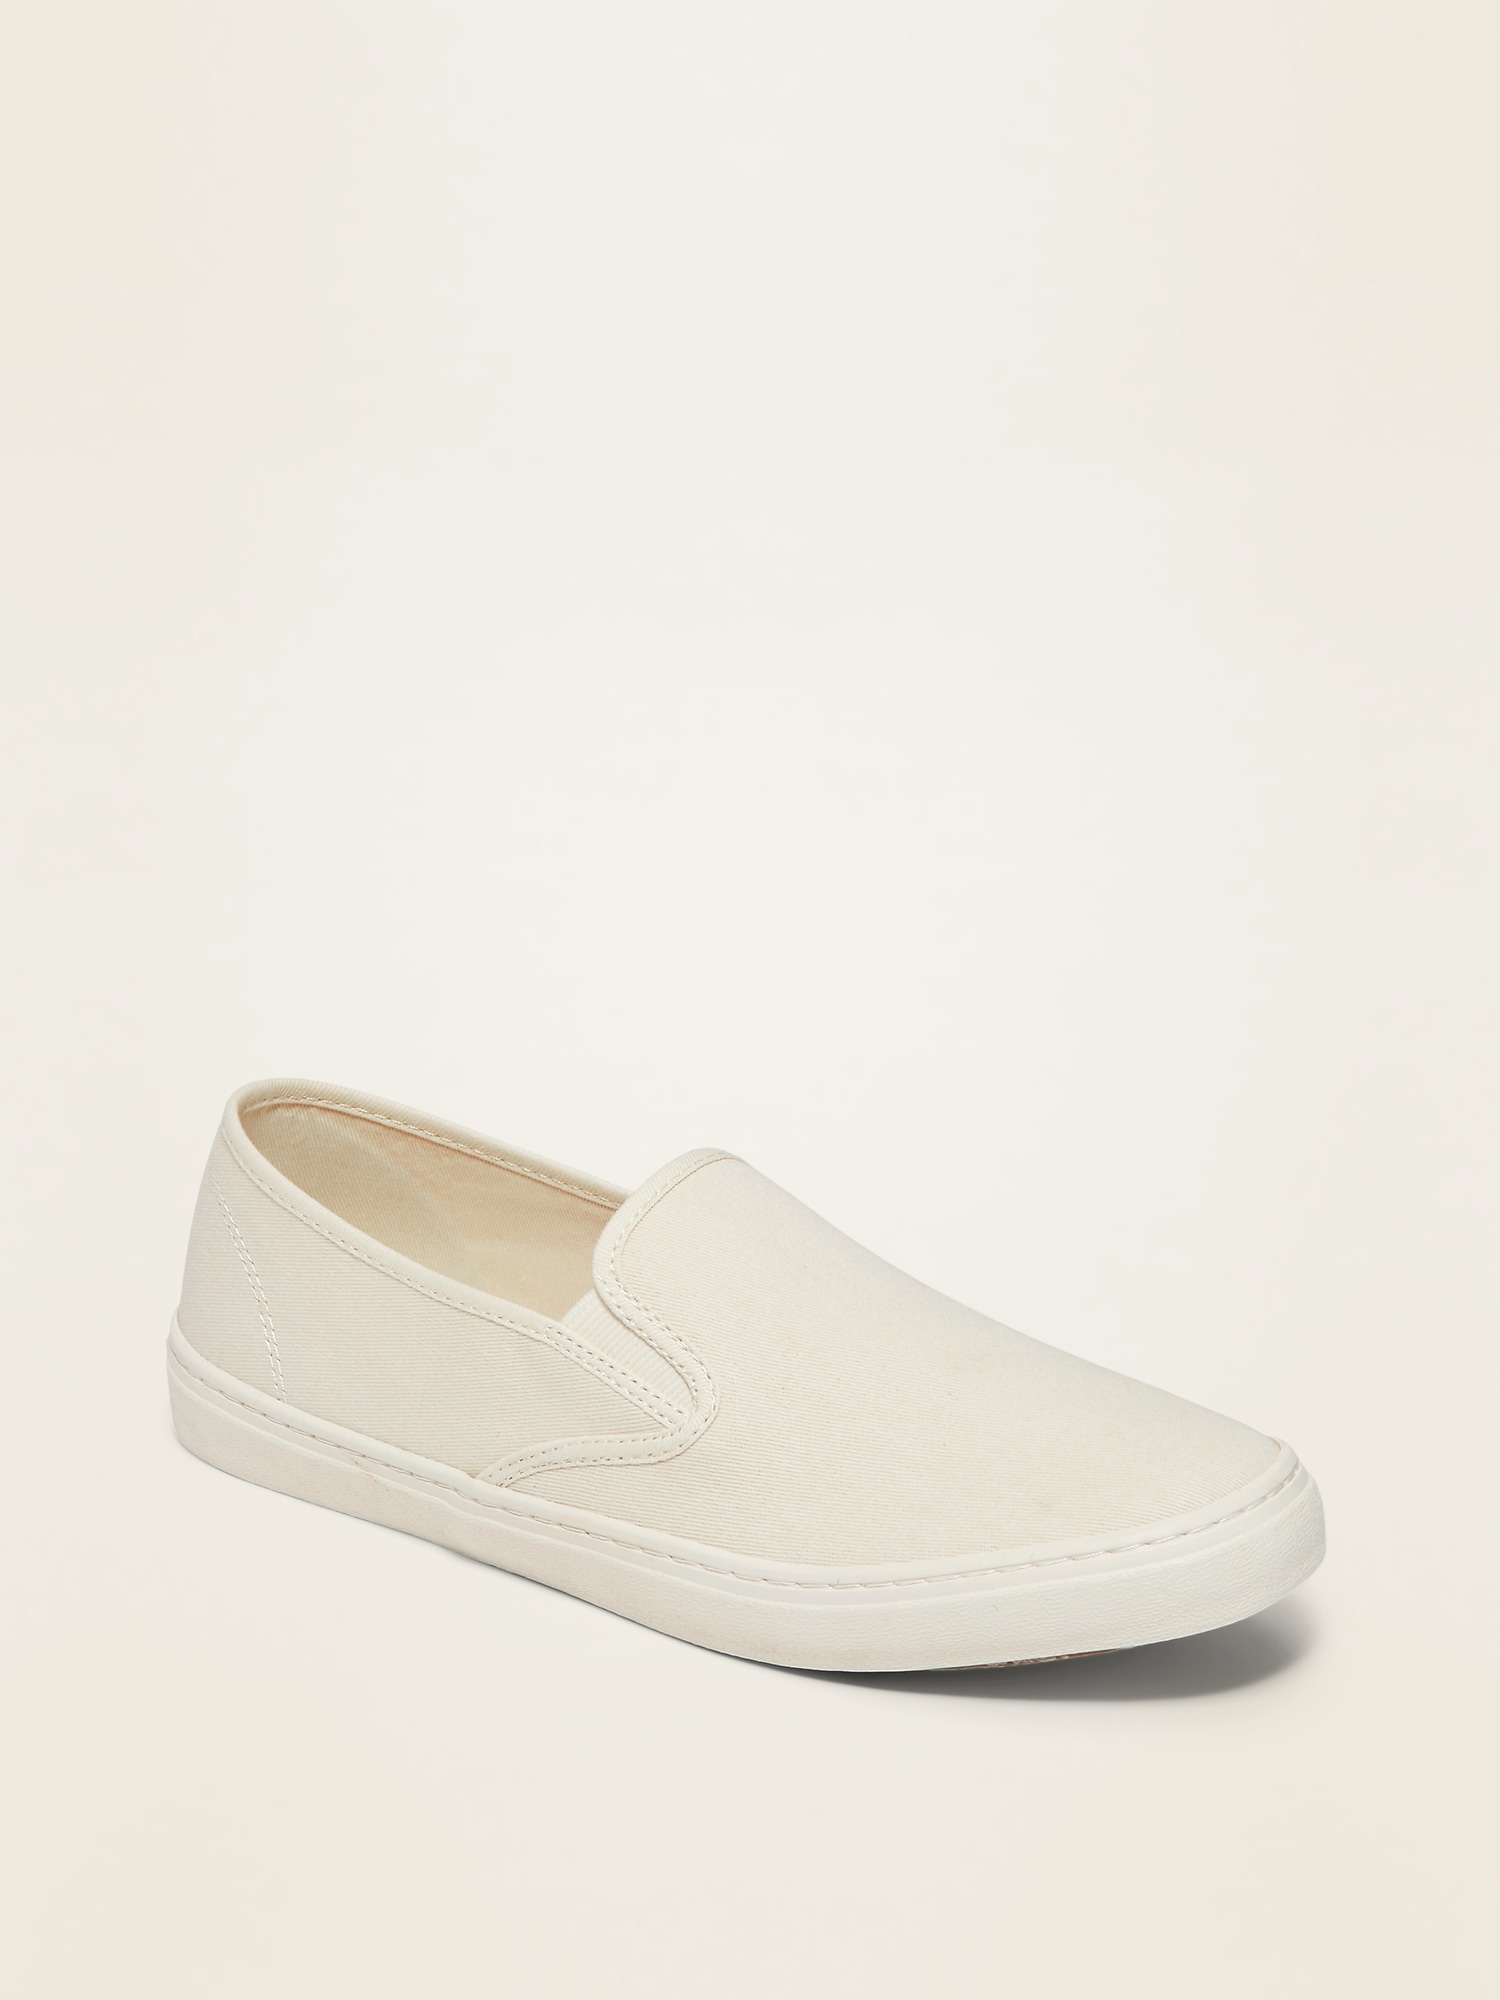 and slip ons